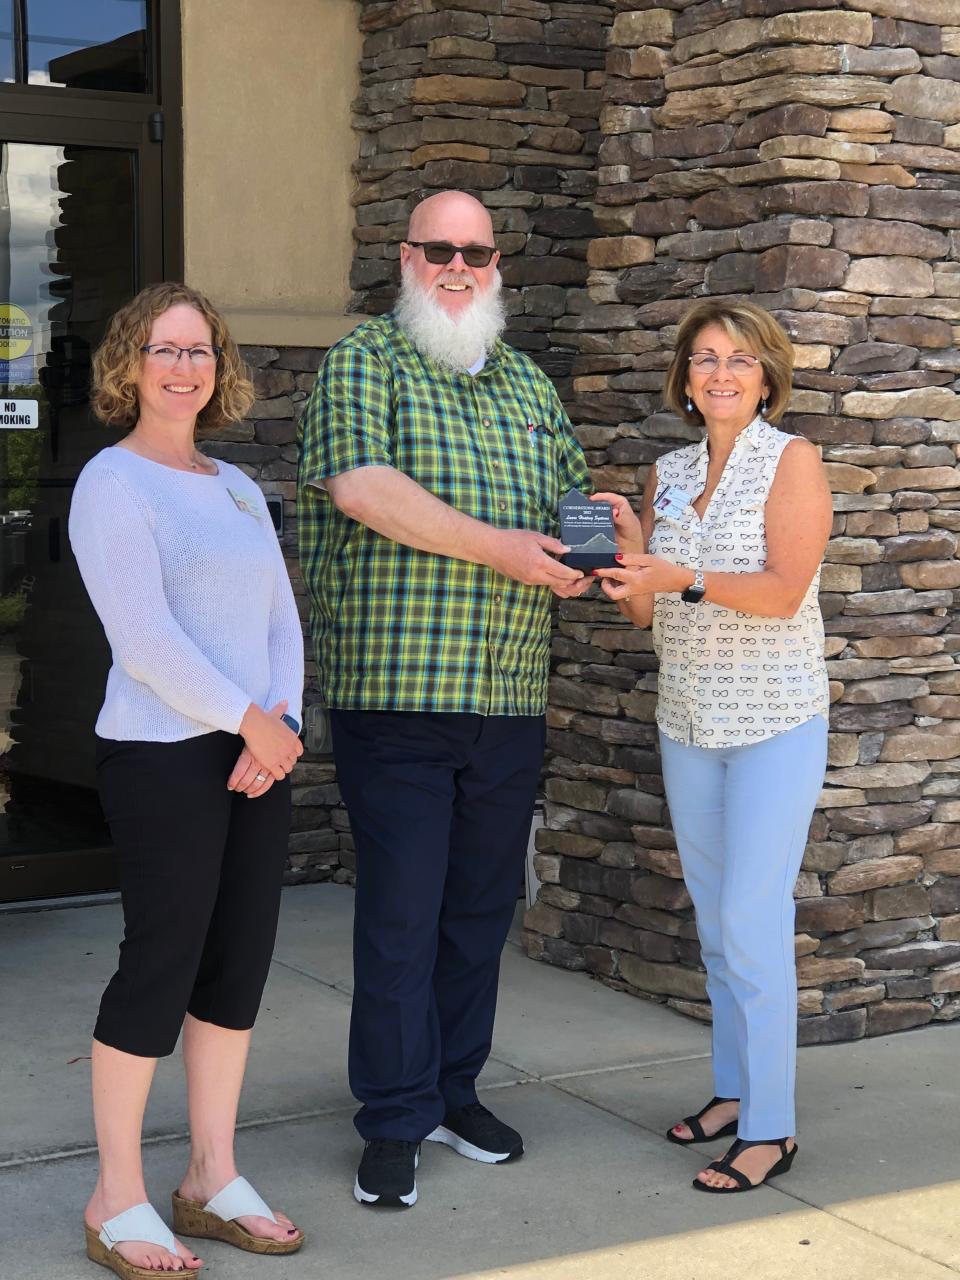 From left to right are Erika Lee, Advancement Director at Cornerstone VNA, Mark Farrell, Director of Manufacturing Operations at Laars, and Julie Reynolds, President/CEO at Cornerstone VNA.